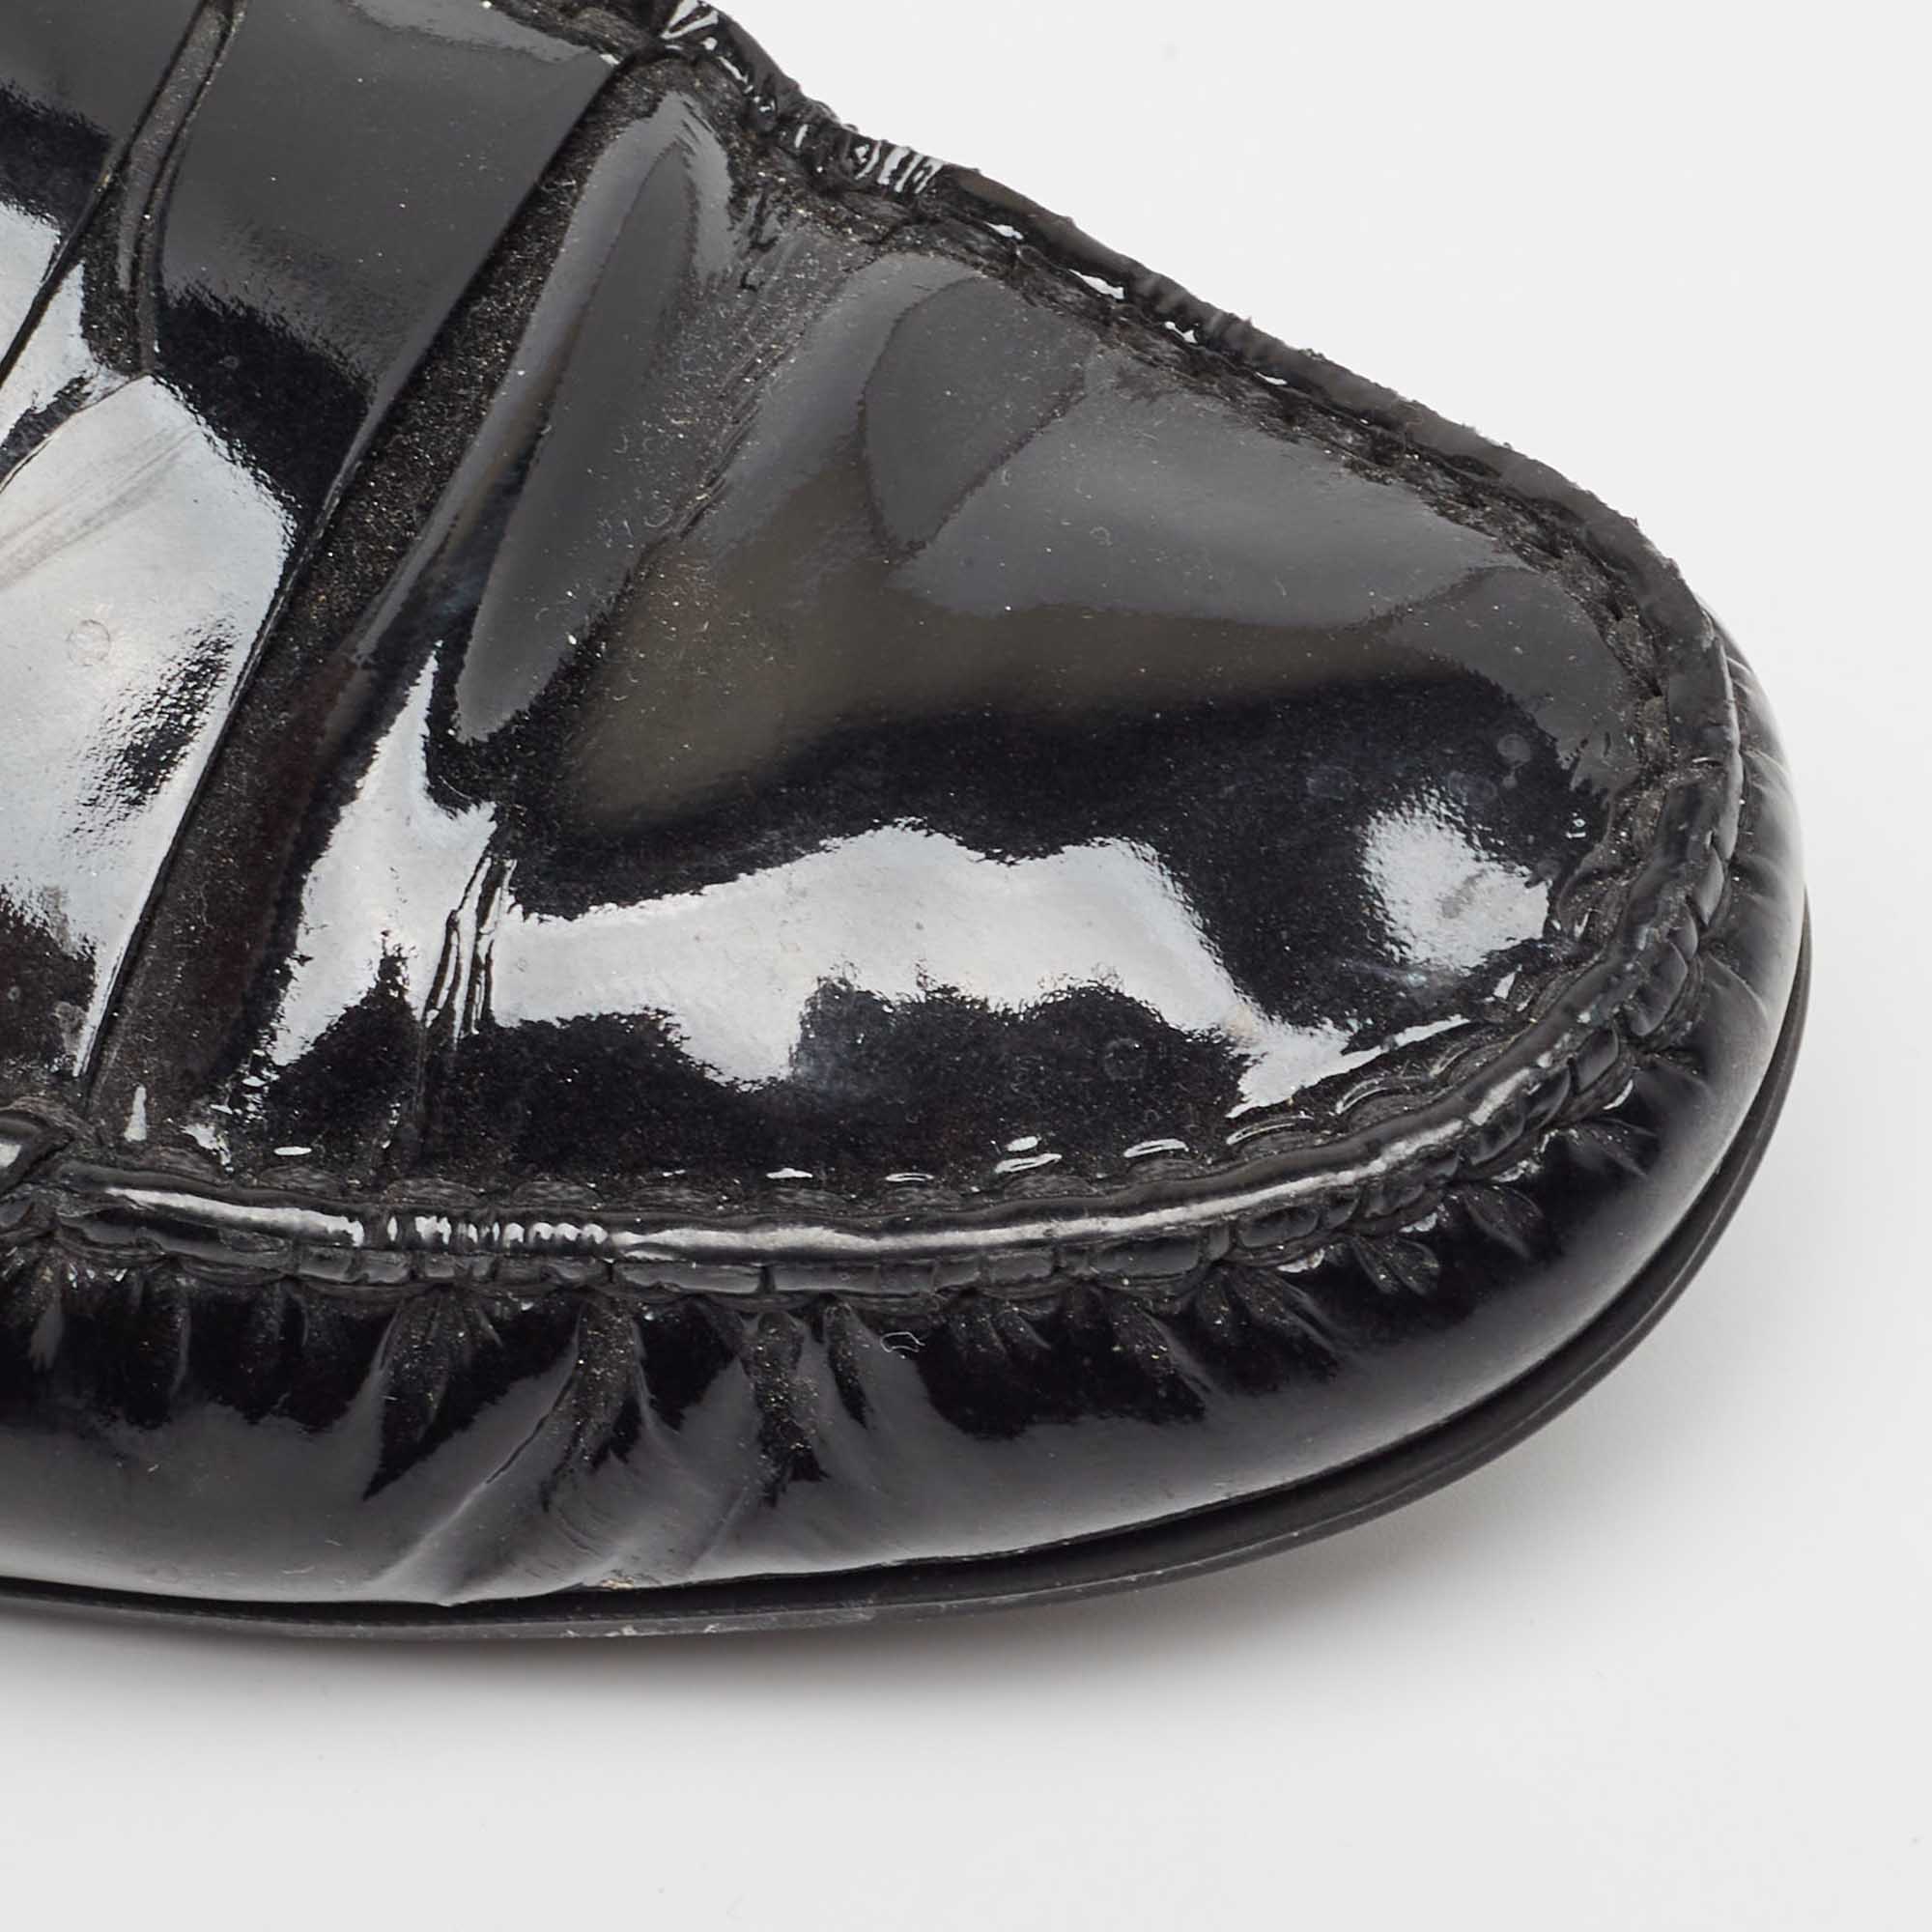 Tod's  Black Patent Leather Penny Slip On Loafers Size 39